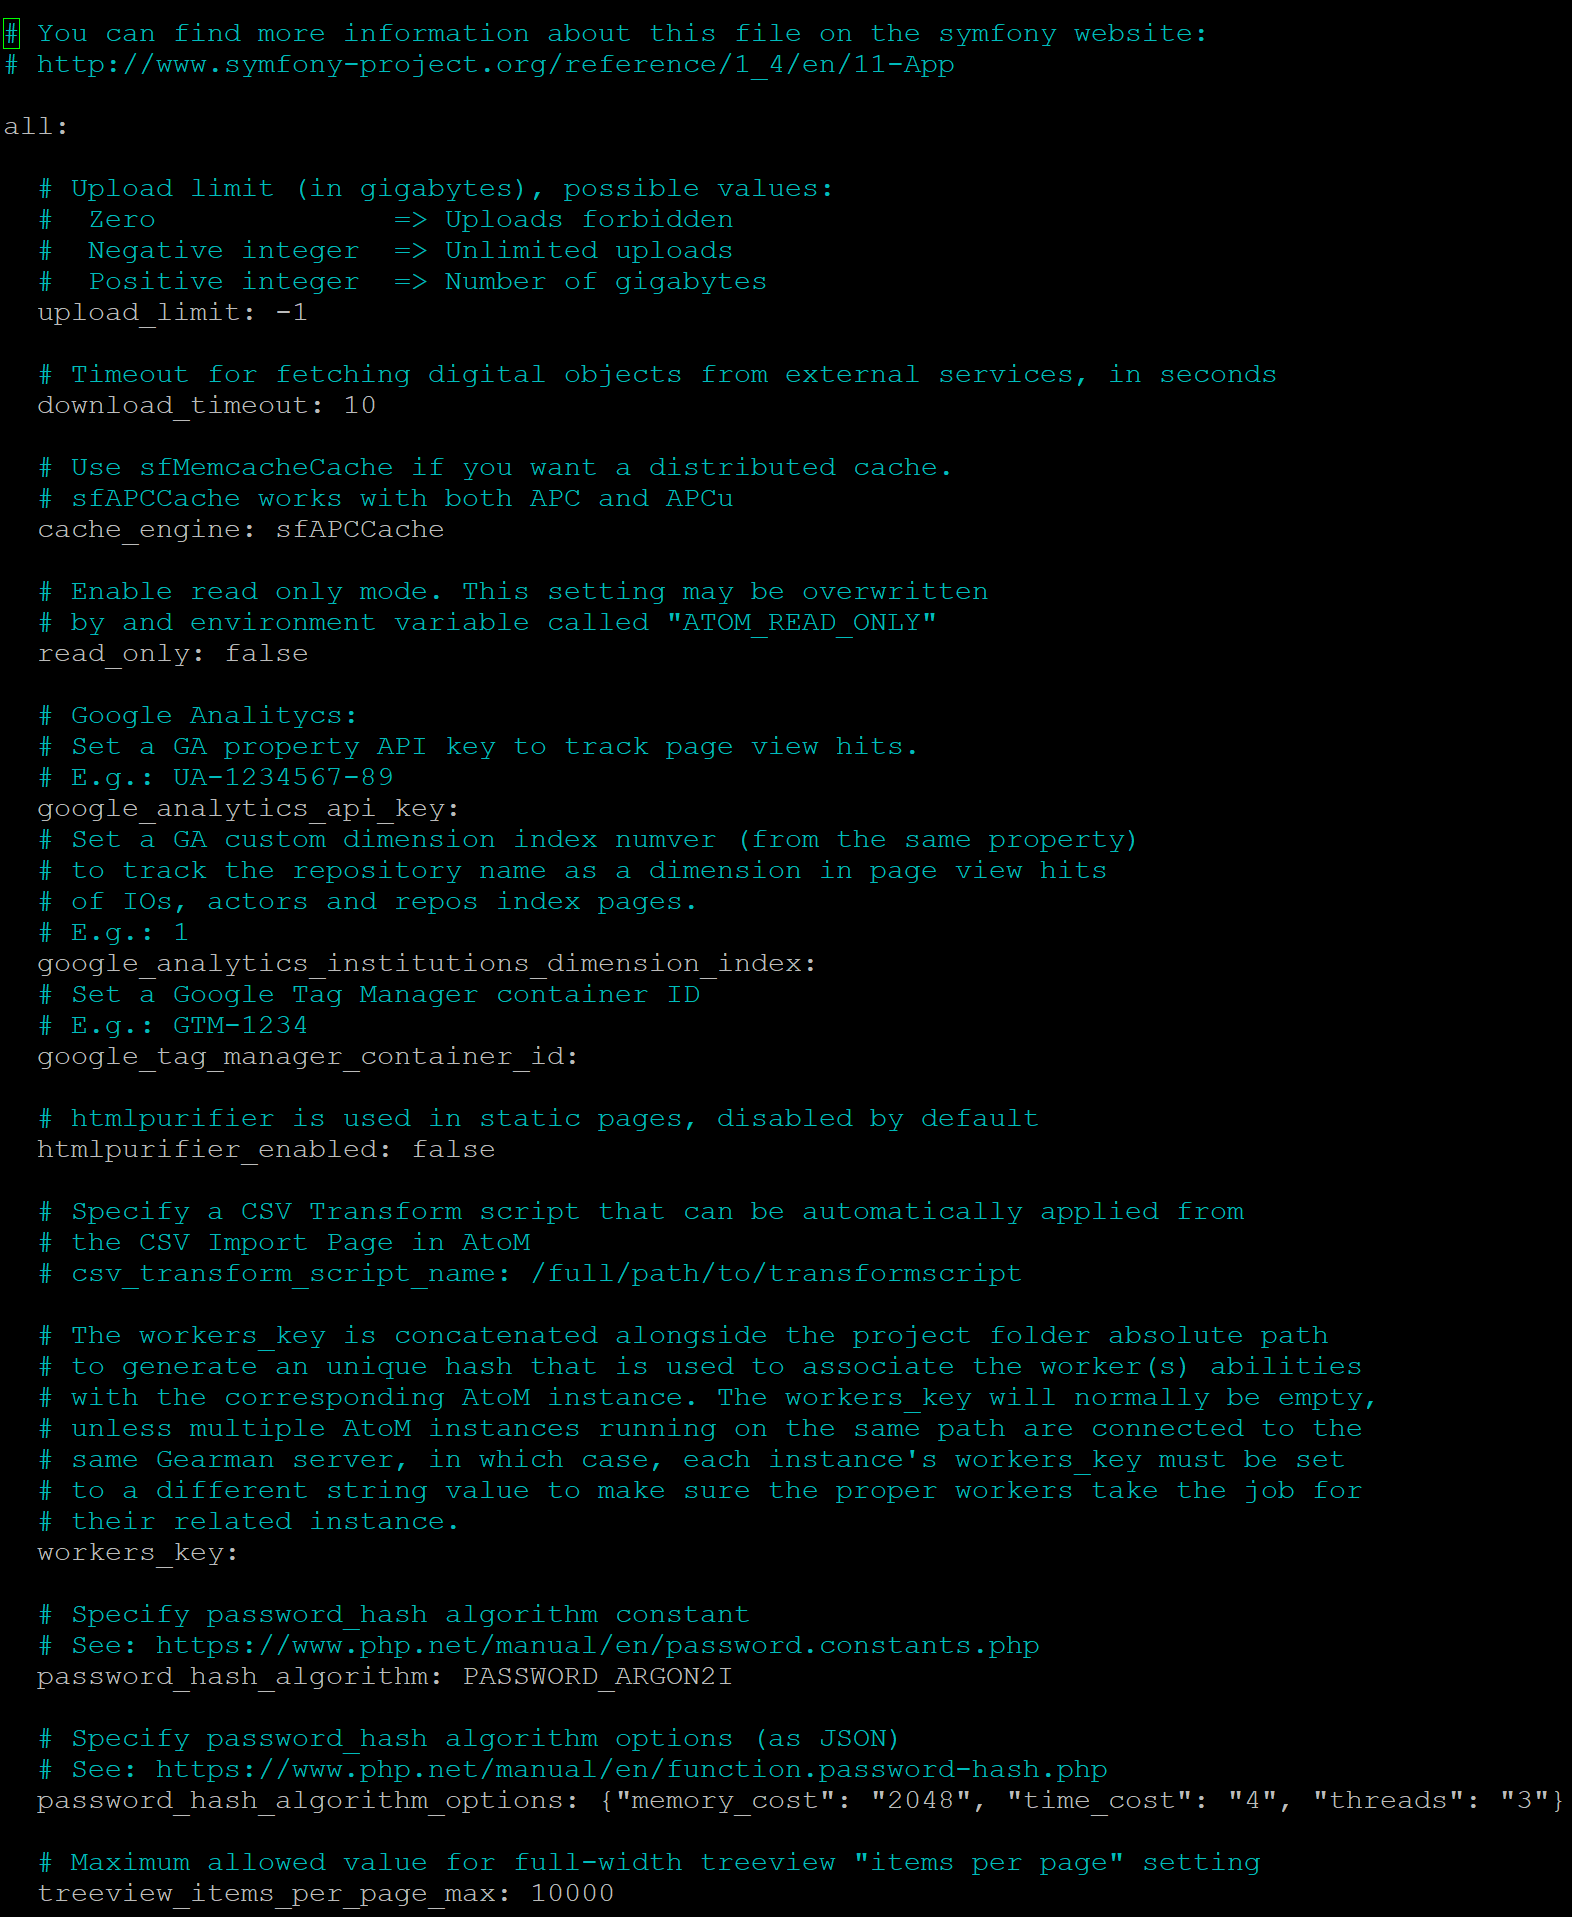 An image of the app.yml file in the command-line